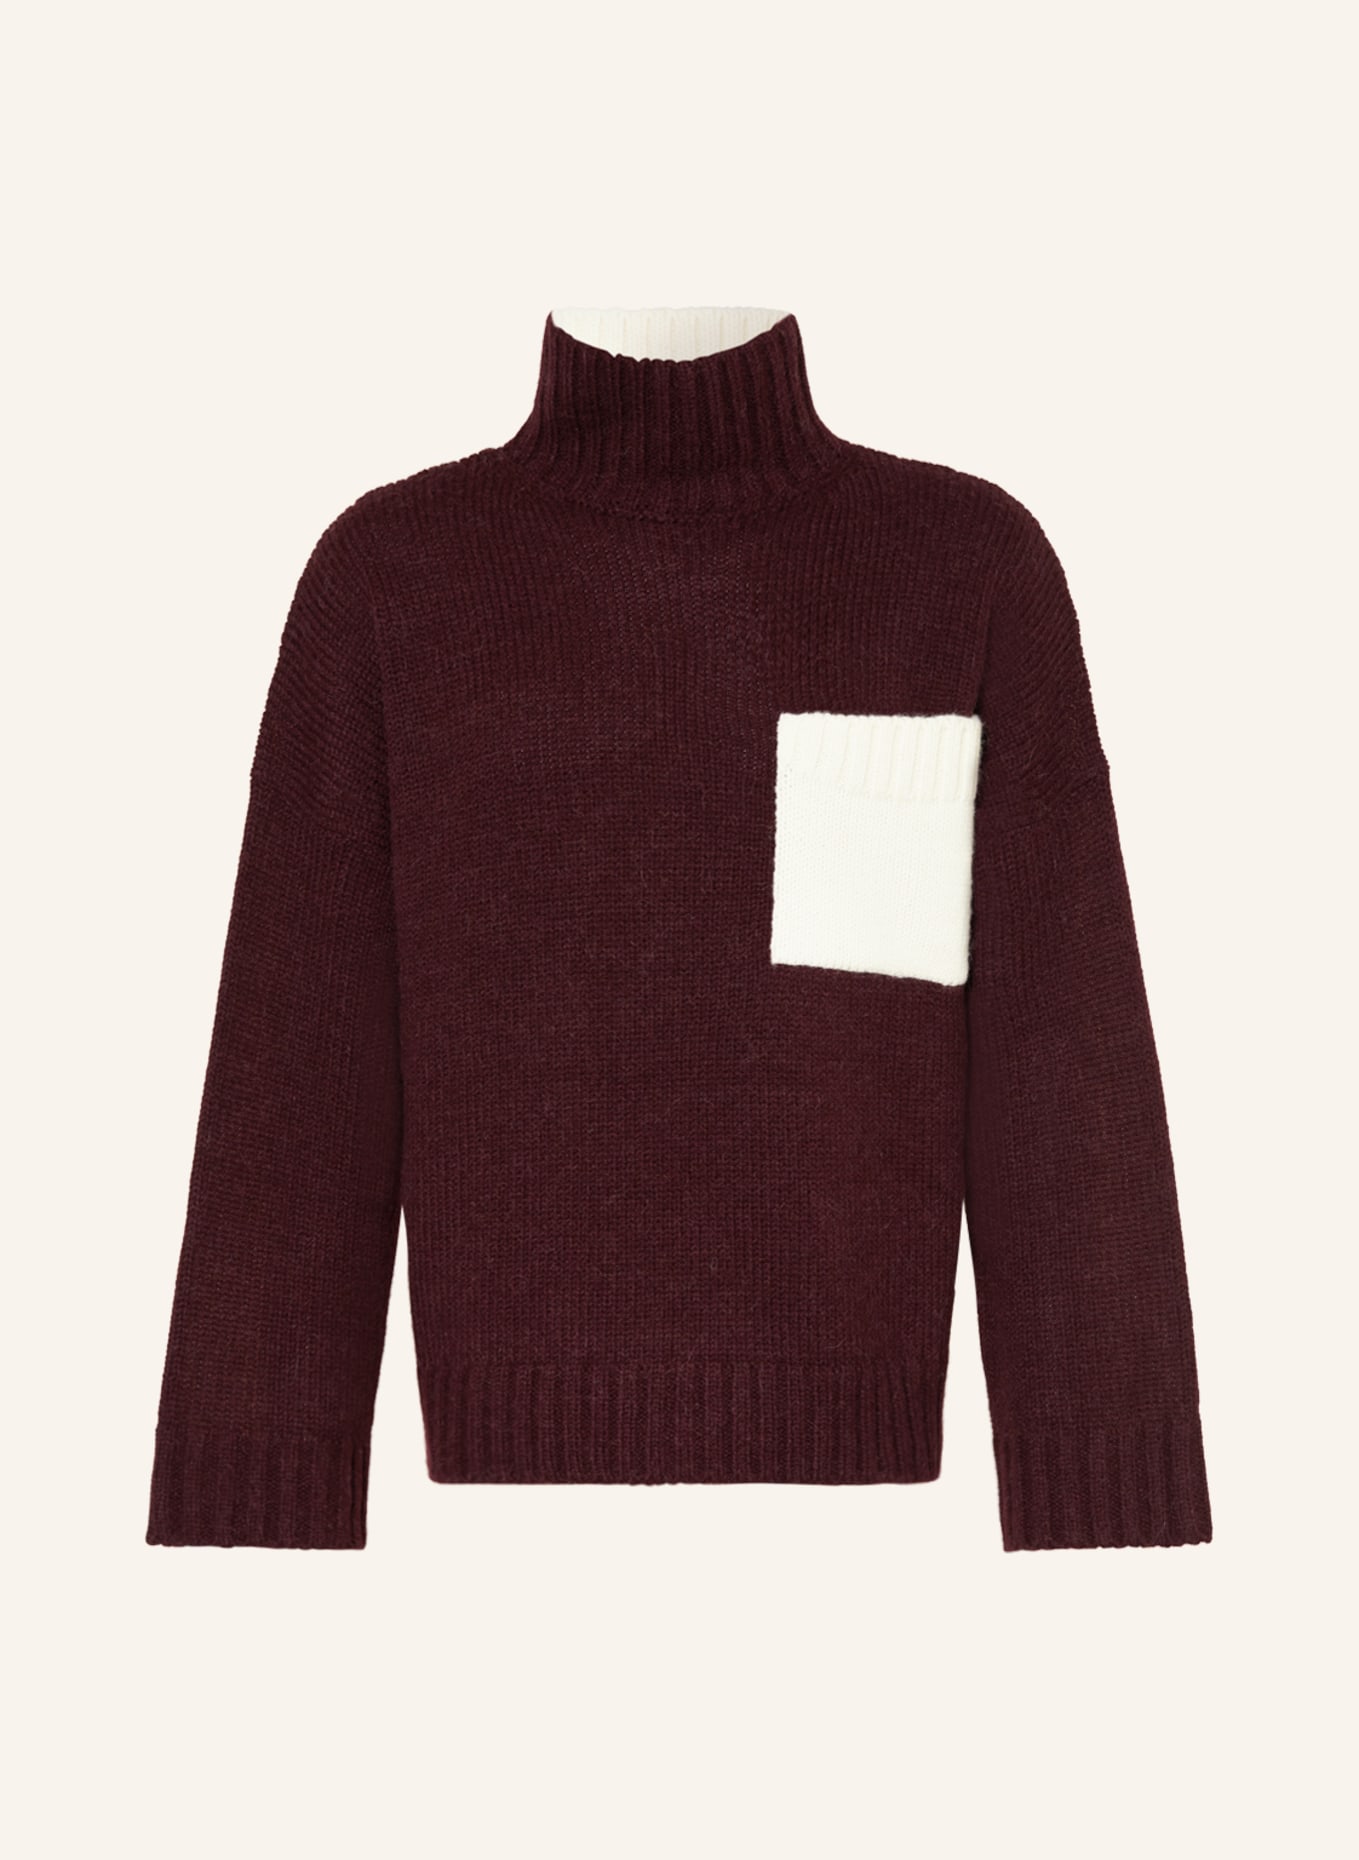 JW ANDERSON Sweater with alpaca, Color: DARK RED/ WHITE (Image 1)